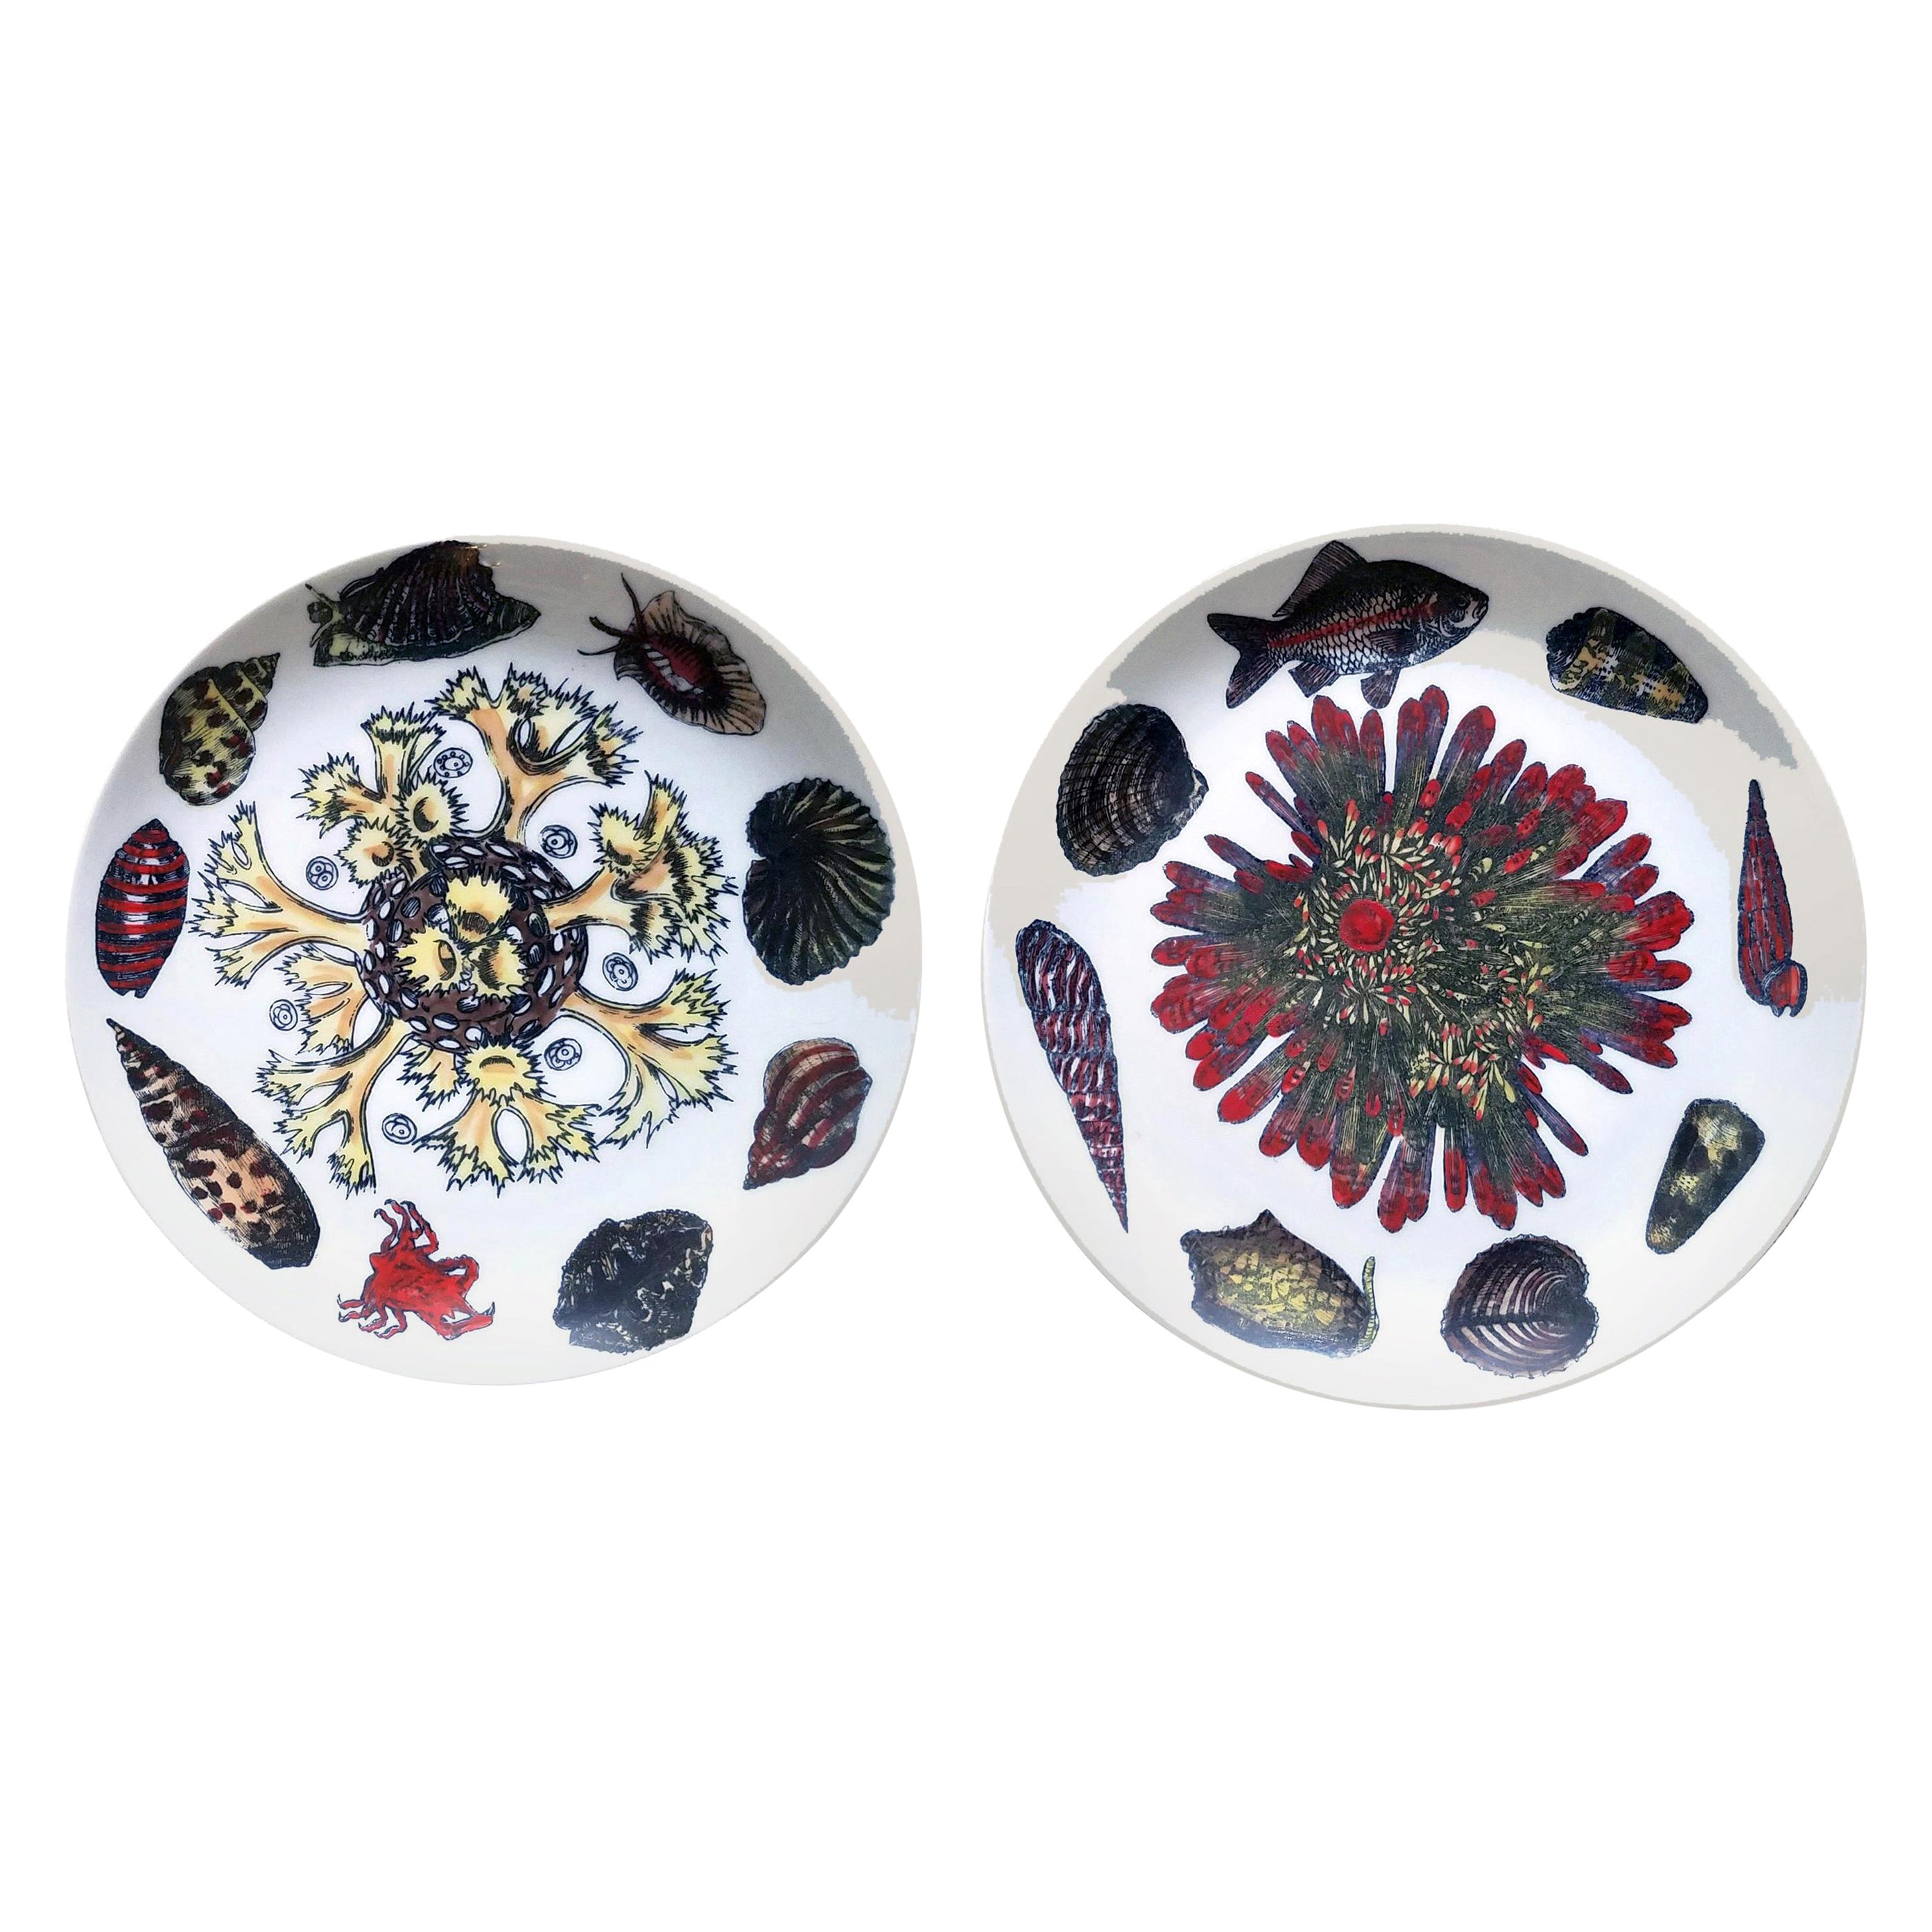 Vintage Piero Fornasetti Porcelain Plates, Pair Decorated with Sea Anemones For Sale